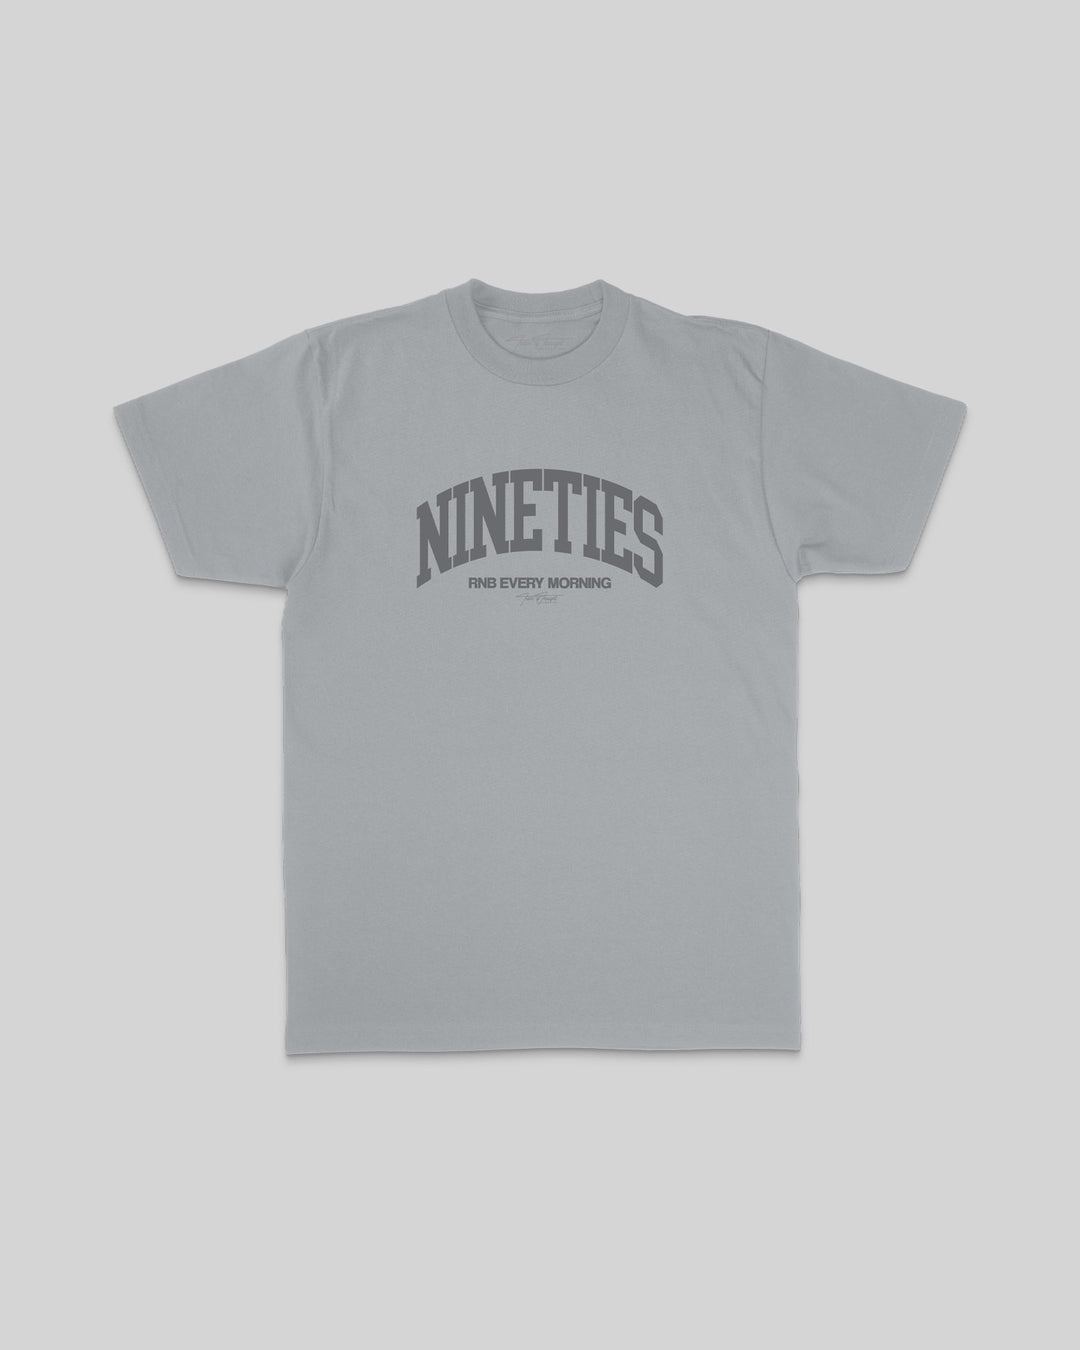 Nineties Rnb Every Morning Arch Grey Tee - trainofthoughtcollective